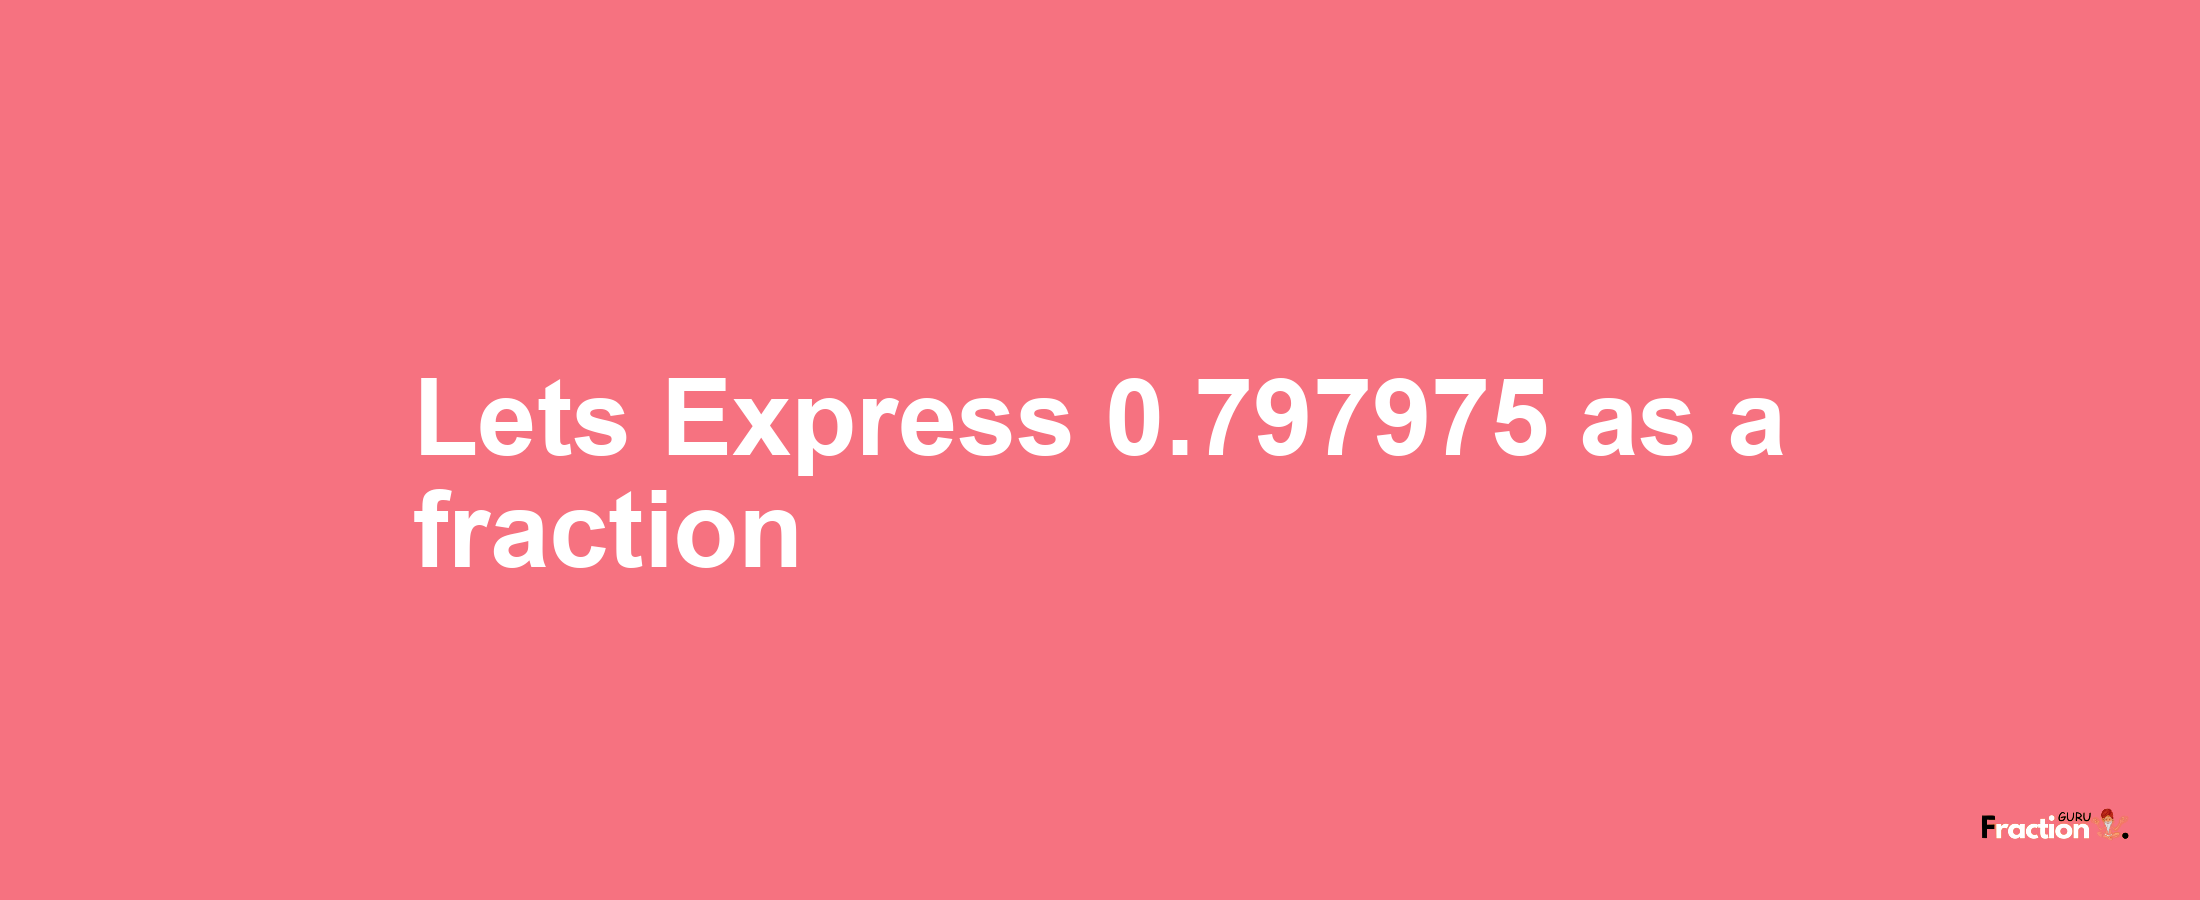 Lets Express 0.797975 as afraction